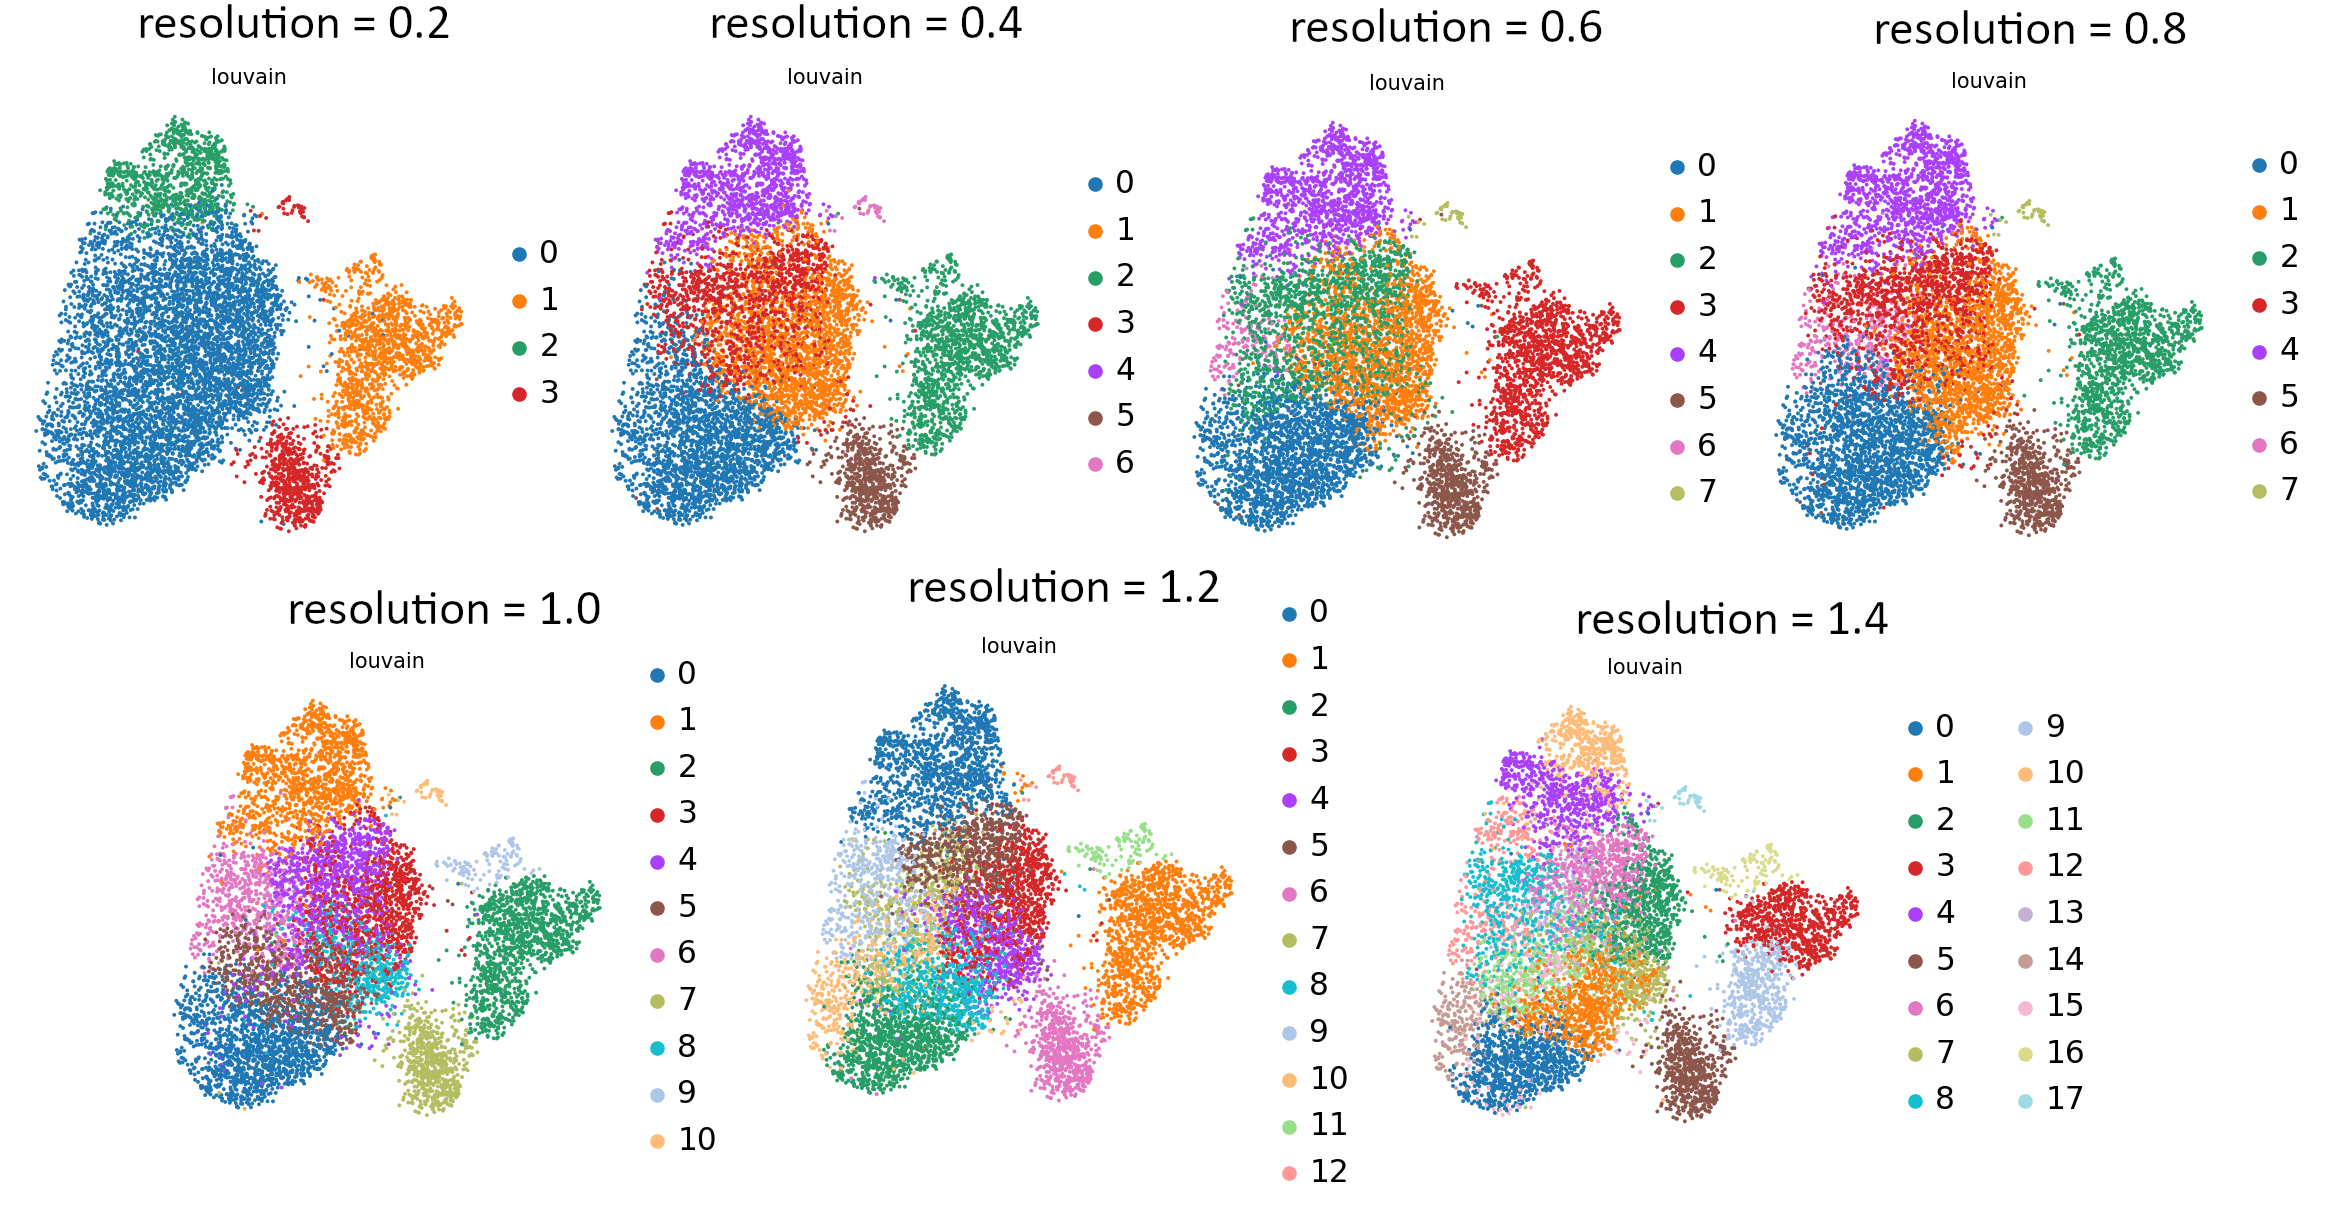 Graphs showing the differences between UMAP embeddings caused by different values of resolution.